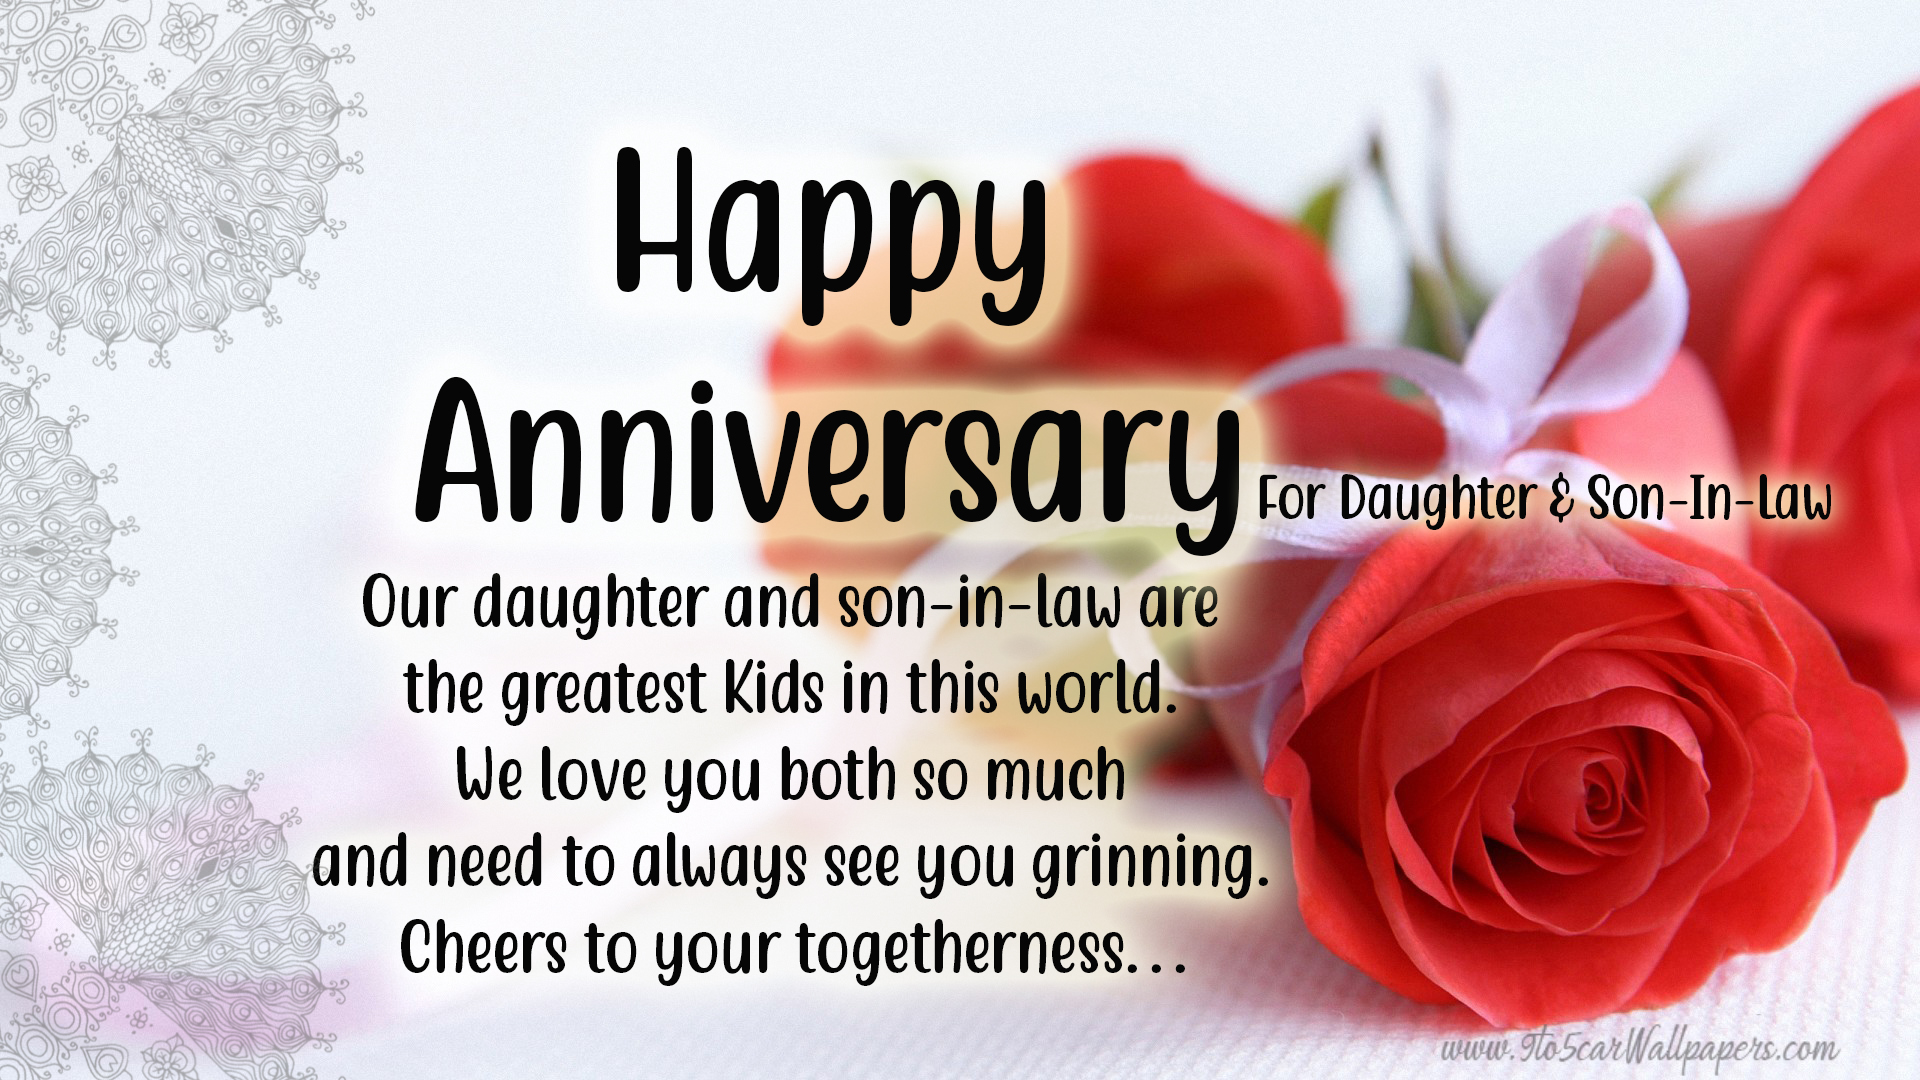 Daughter & Son In Law Anniversary Wishes - My Site